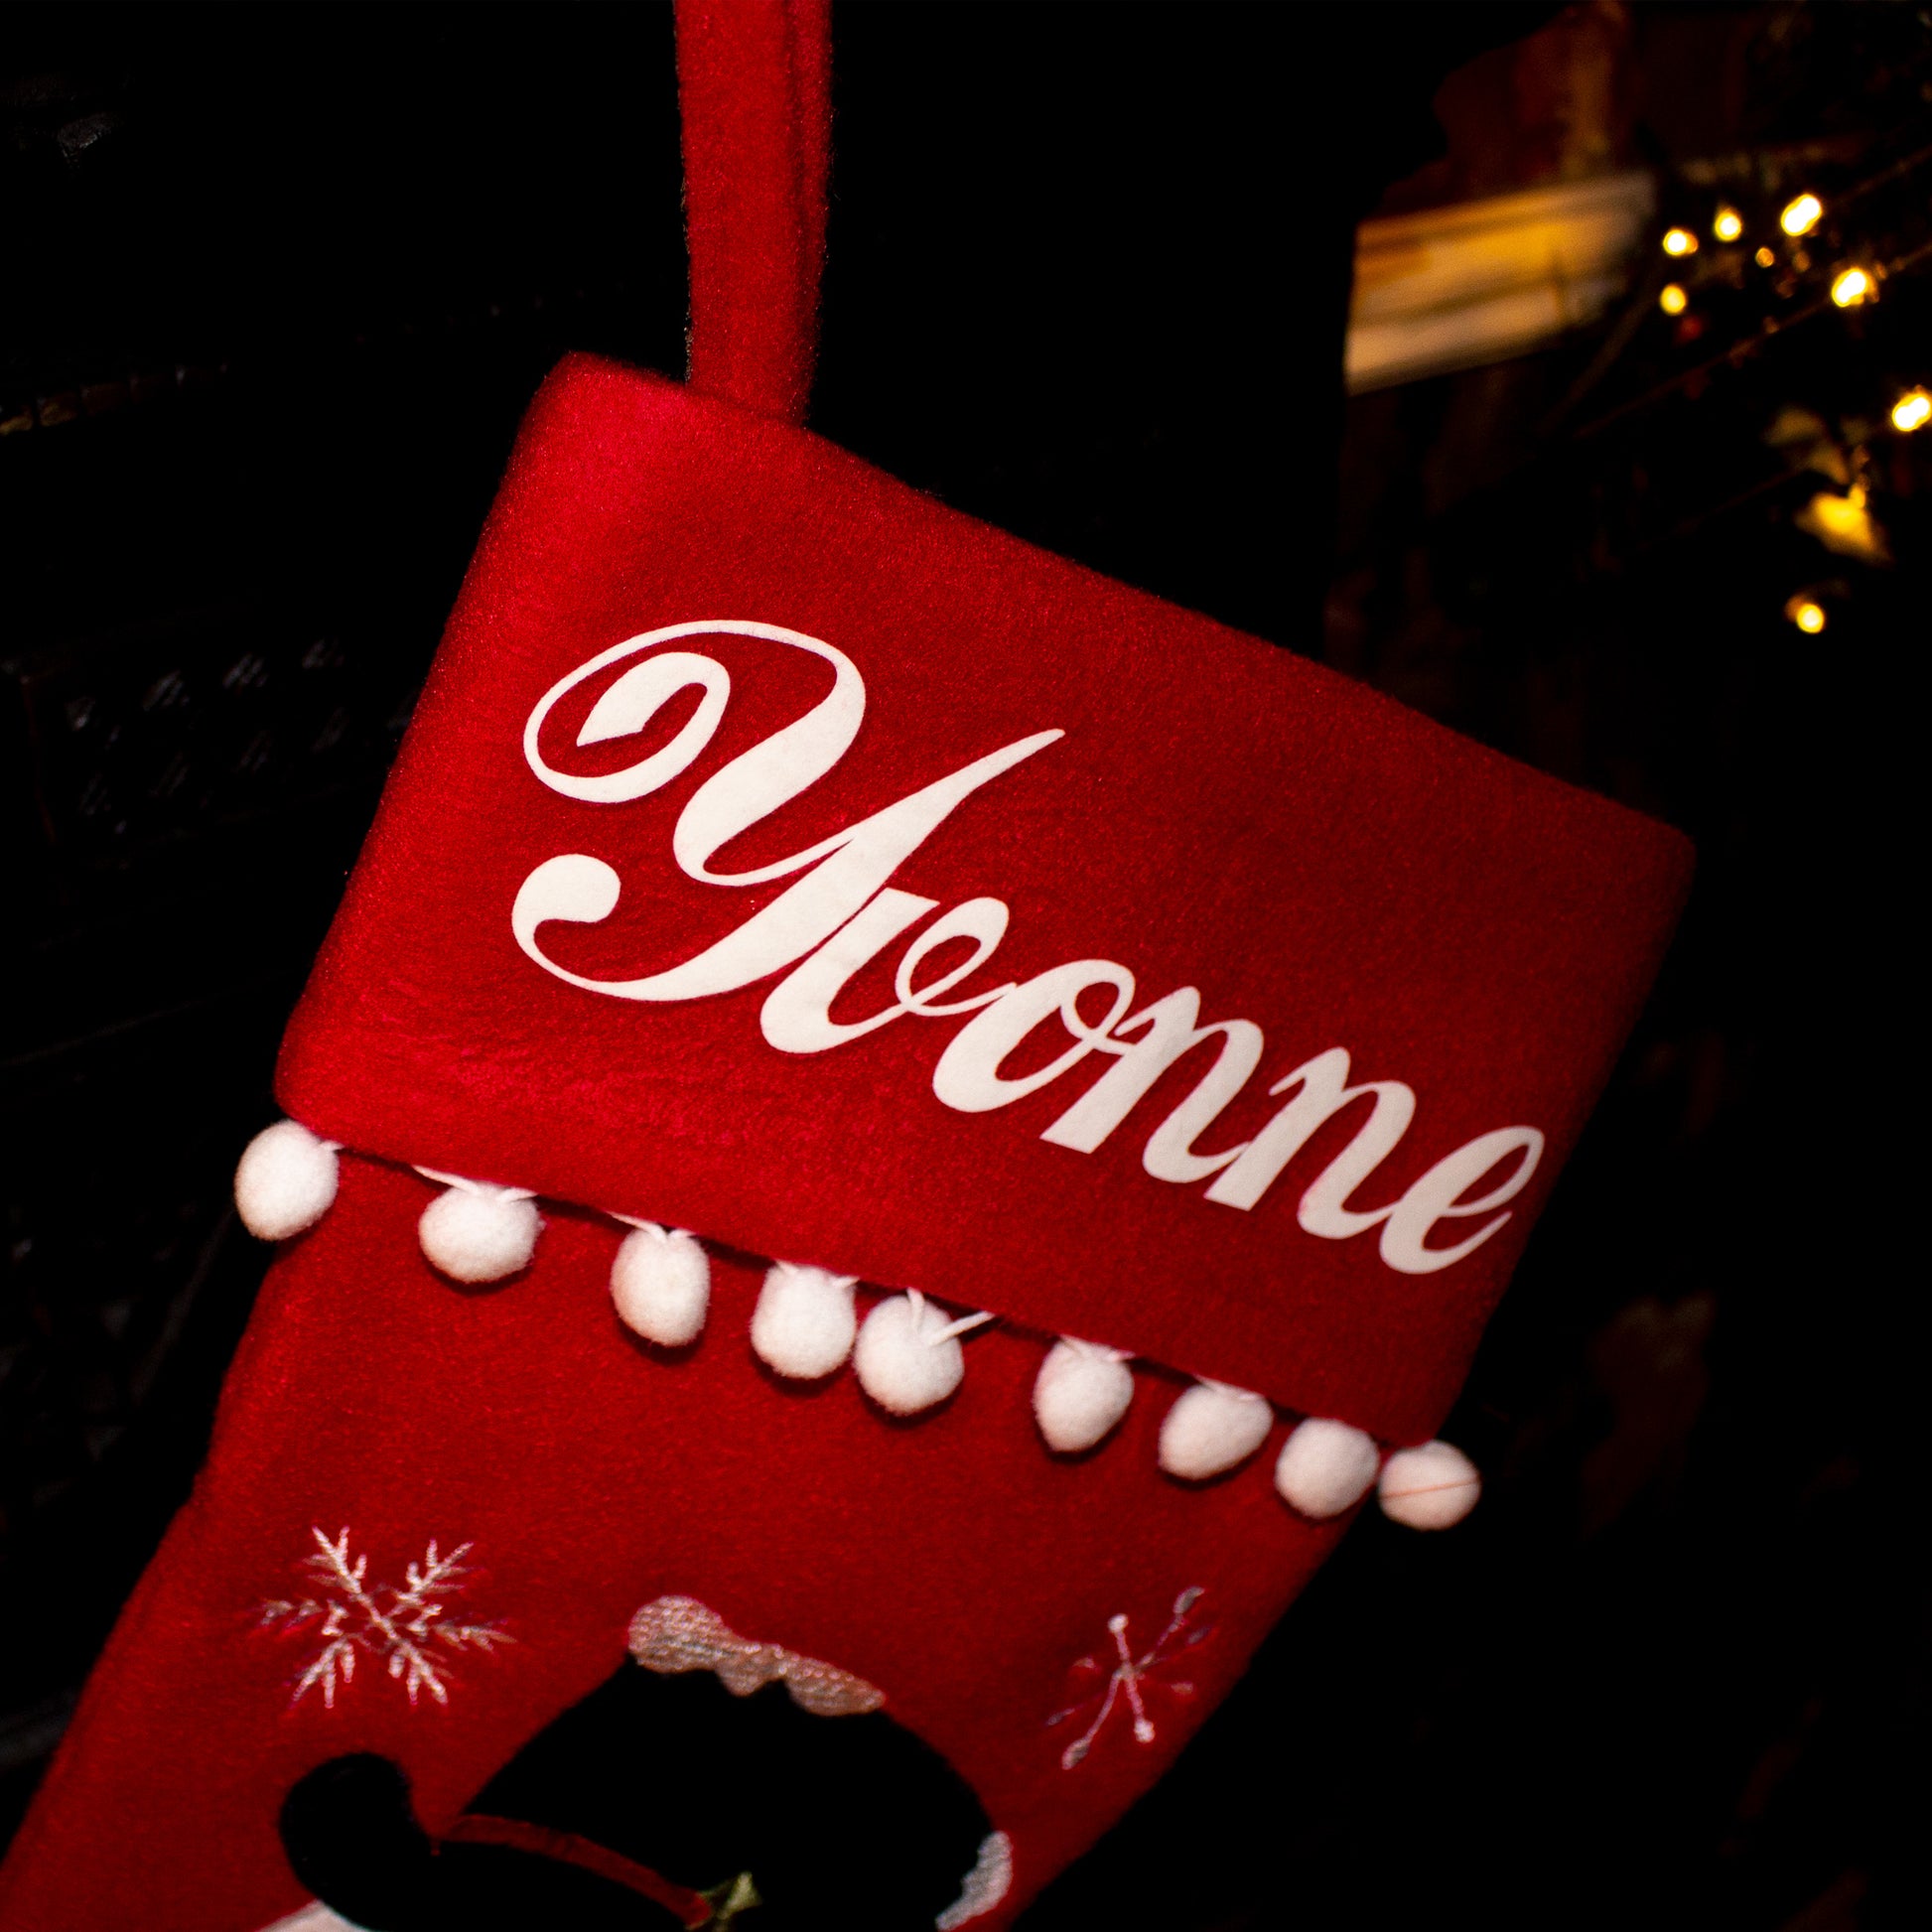 The name Yvonne on a Stocking